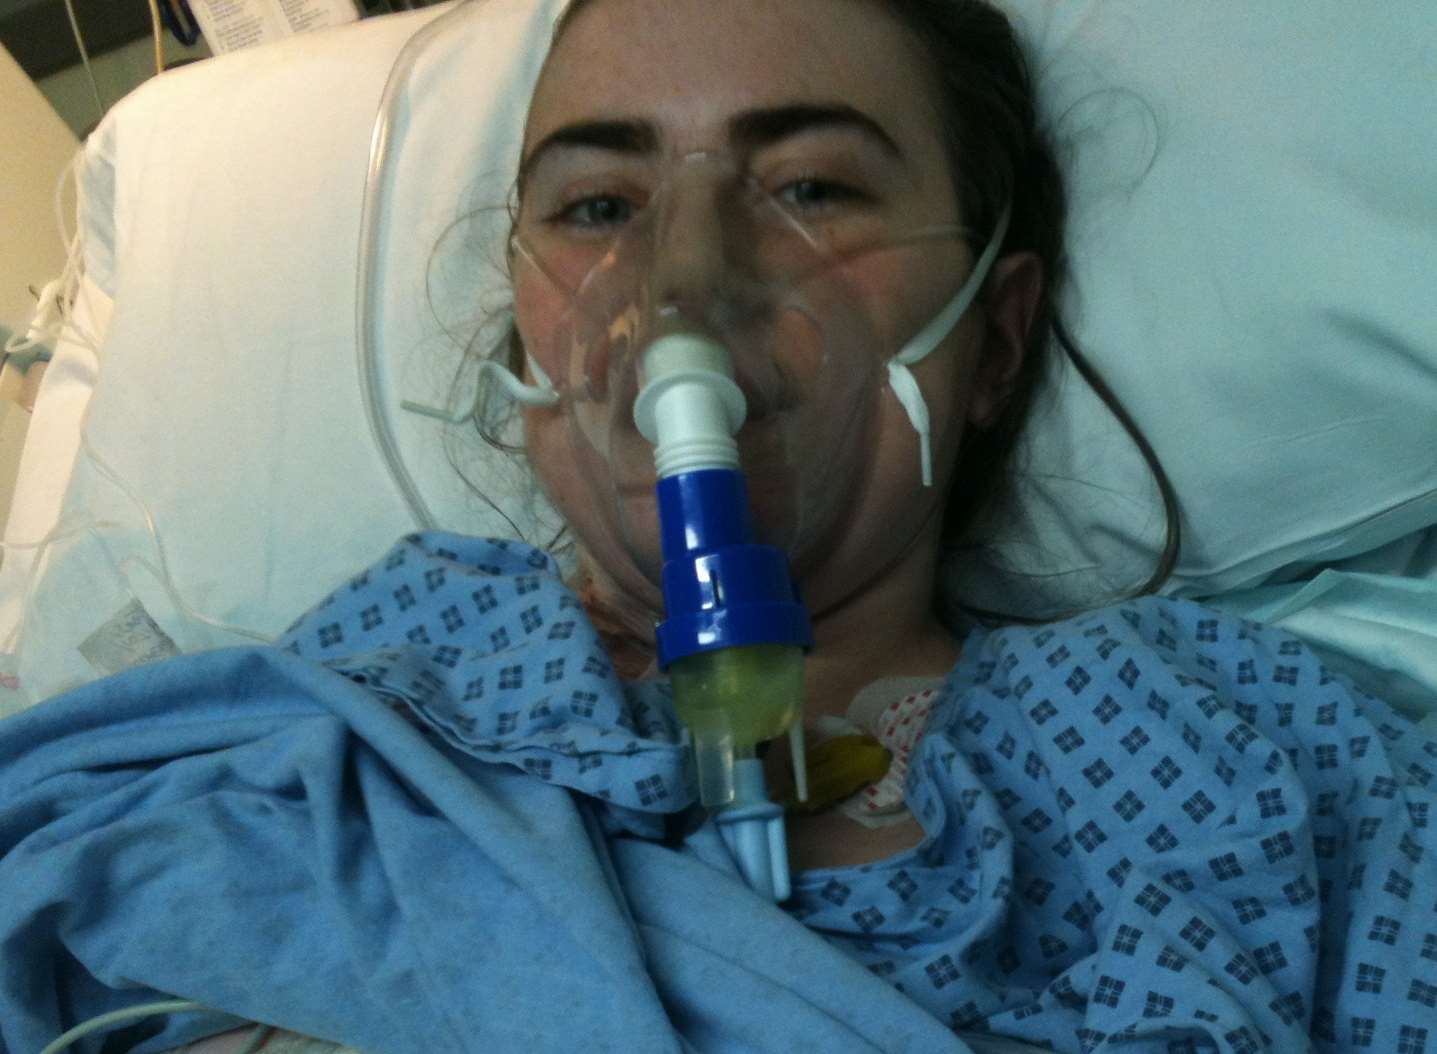 In recovery from her life-saving double lung transplant